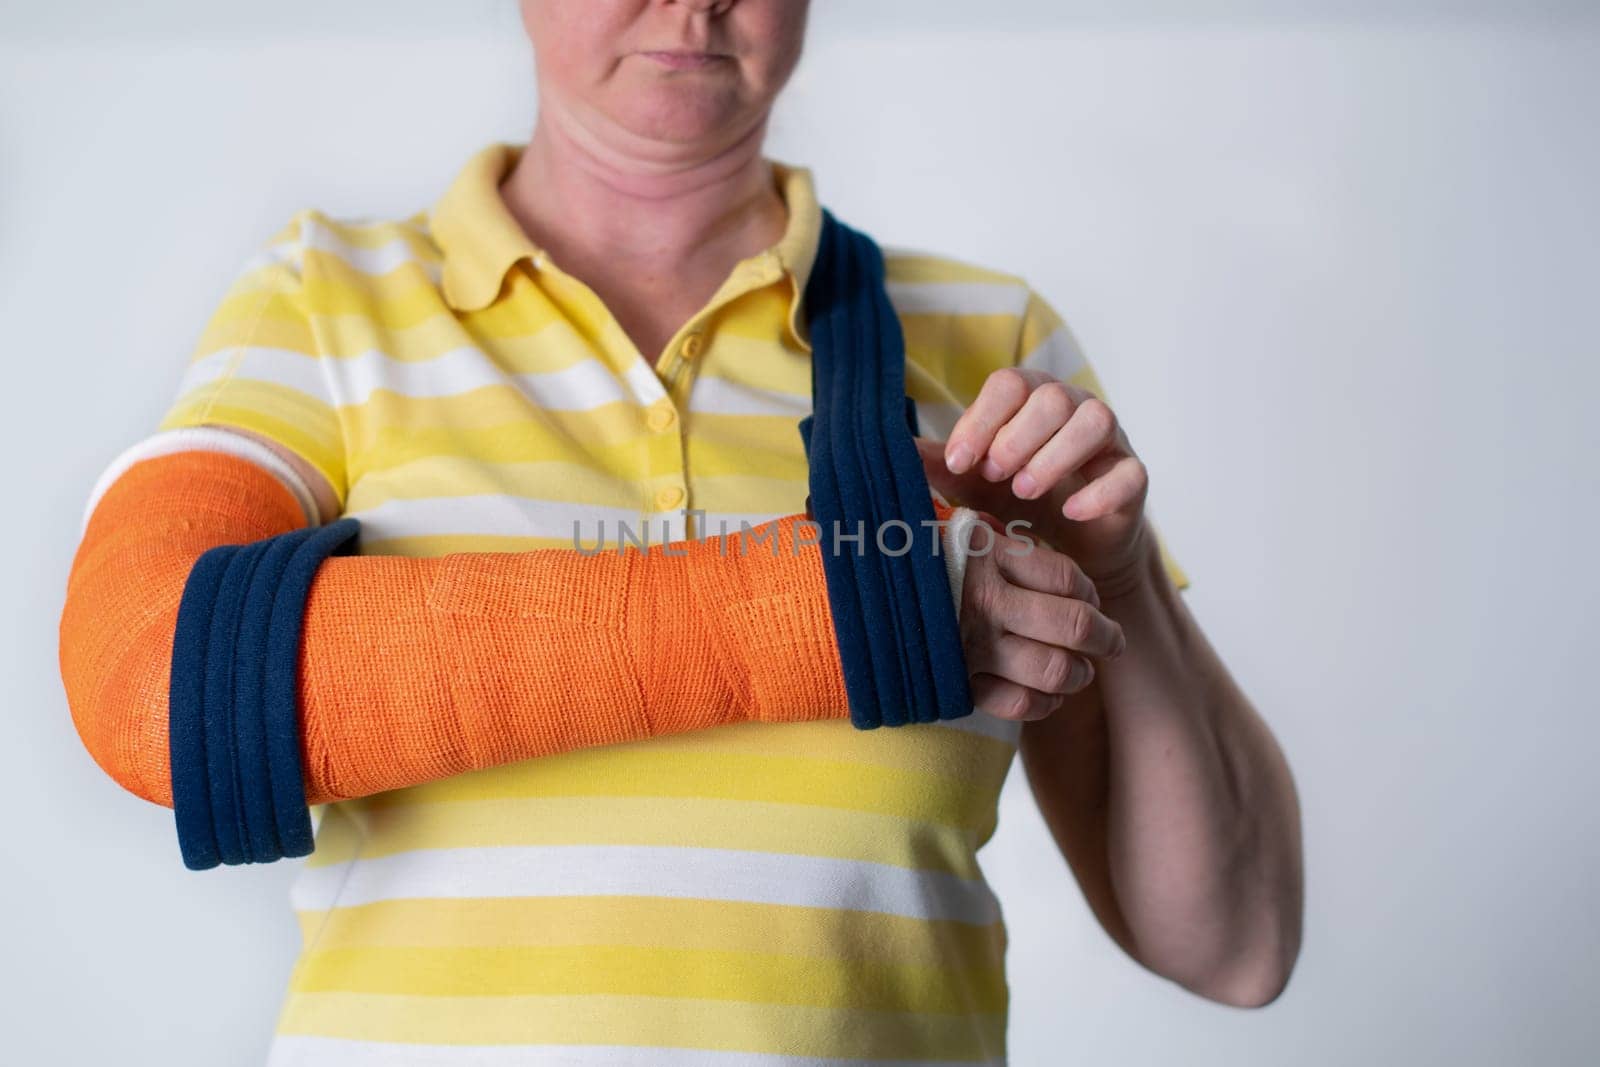 woman with a broken right arm wearing plaster casts to hold the broken bones in place until they heal, hanging her arm in a sling, modern treatments, High quality photo